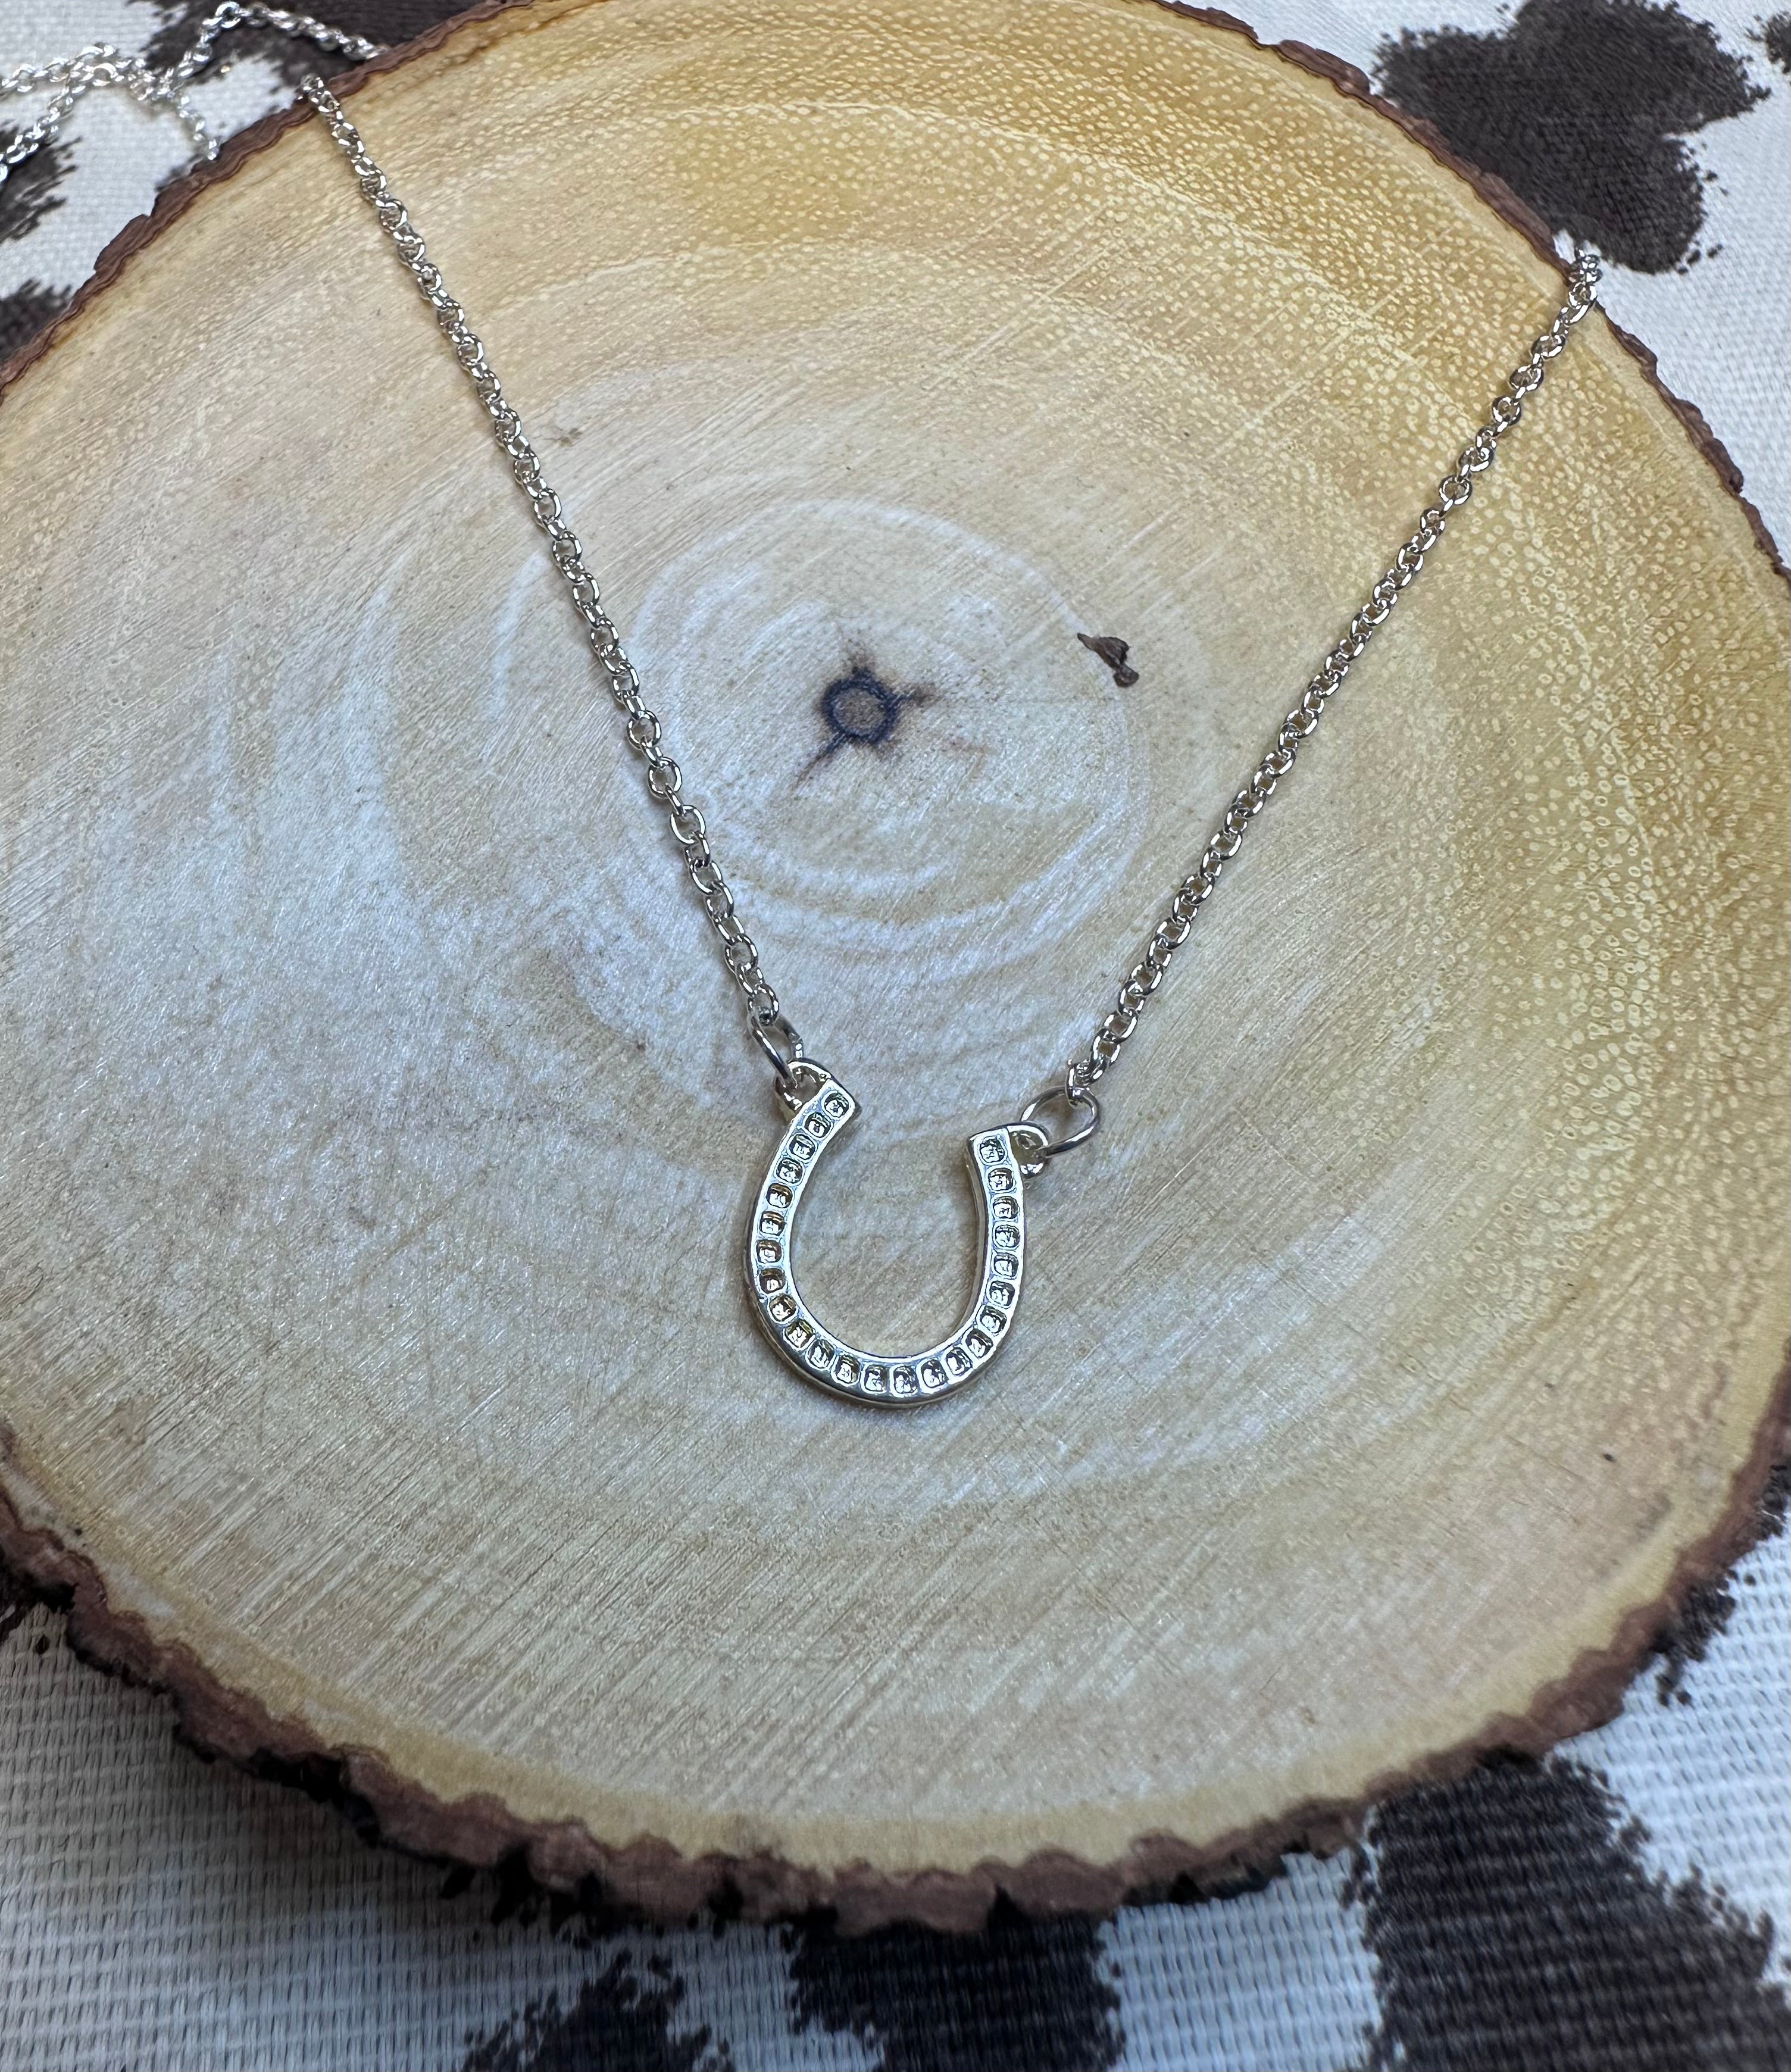 Lucky Horseshoe Necklace. Simple U-Letter Pendant Necklace for Women Girl Equestrian Lovers Jewelry Gifts